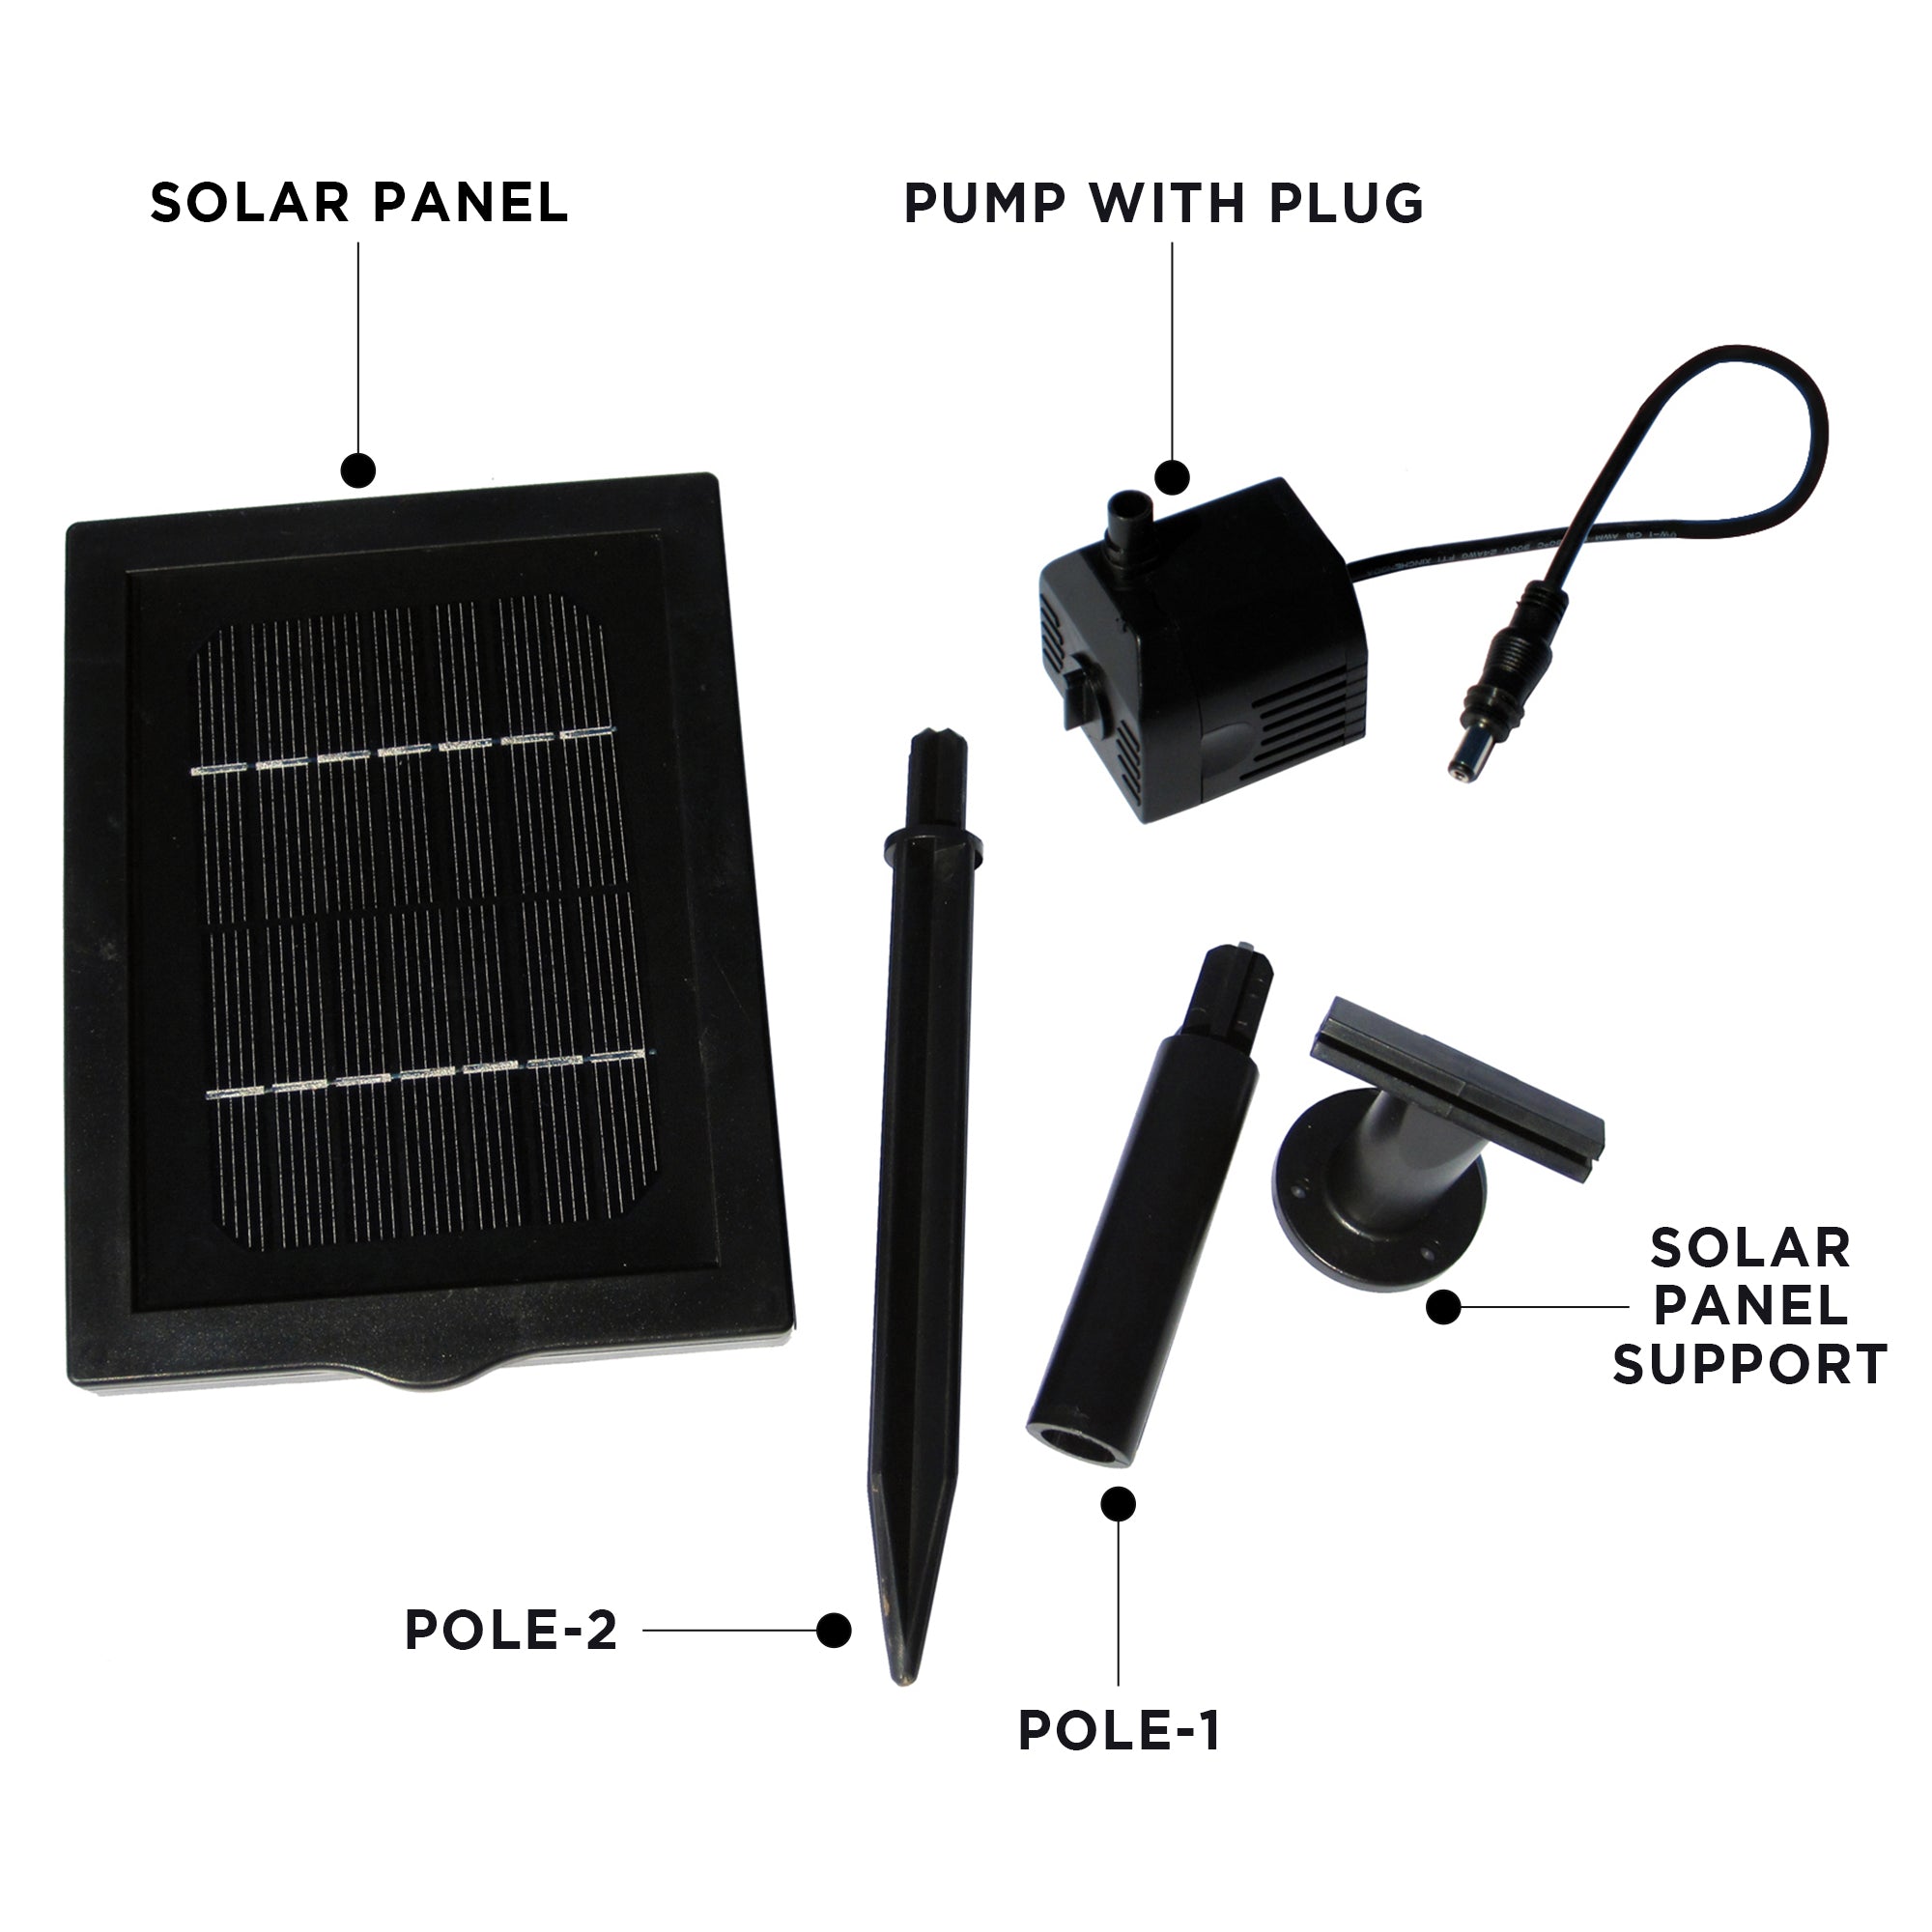 Product shots of parts of pump and solar panel assembly on white background, labeled: Solar panel; pump with plug; solar panel support; pole 1; pole 2